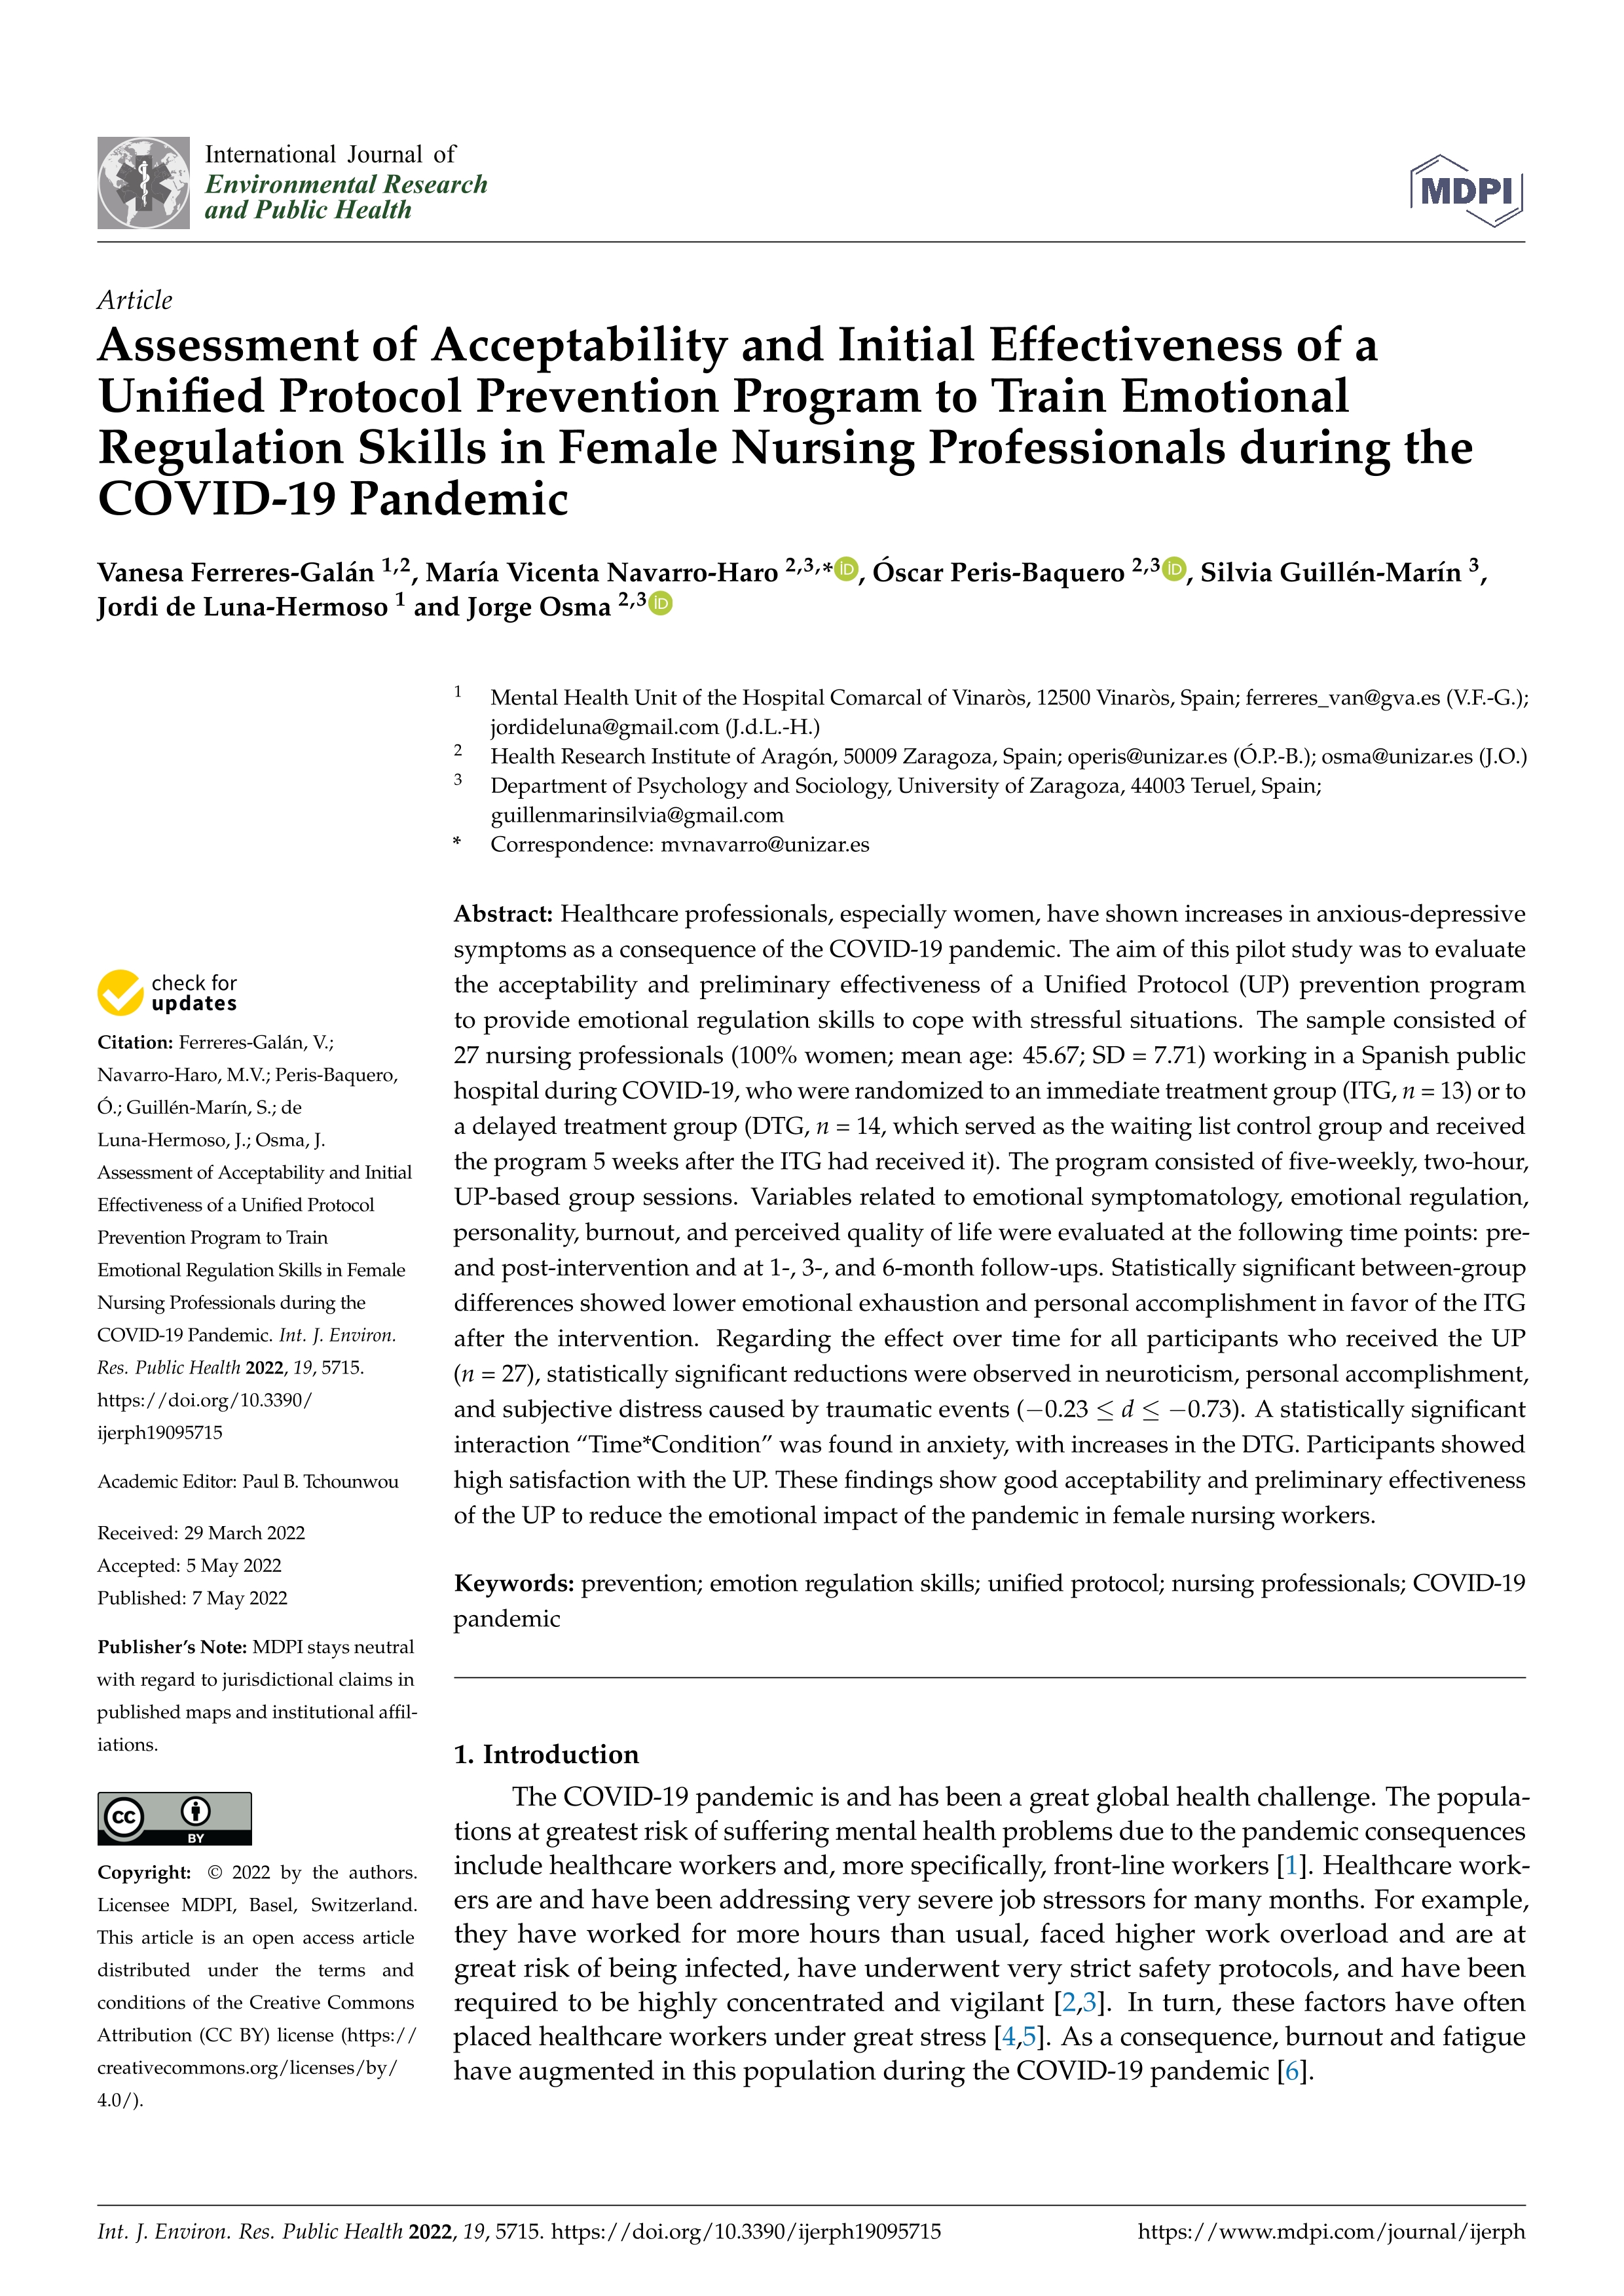 Assessment of Acceptability and Initial Effectiveness of a Unified Protocol Prevention Program to Train Emotional Regulation Skills in Female Nursing Professionals during the COVID-19 Pandemic